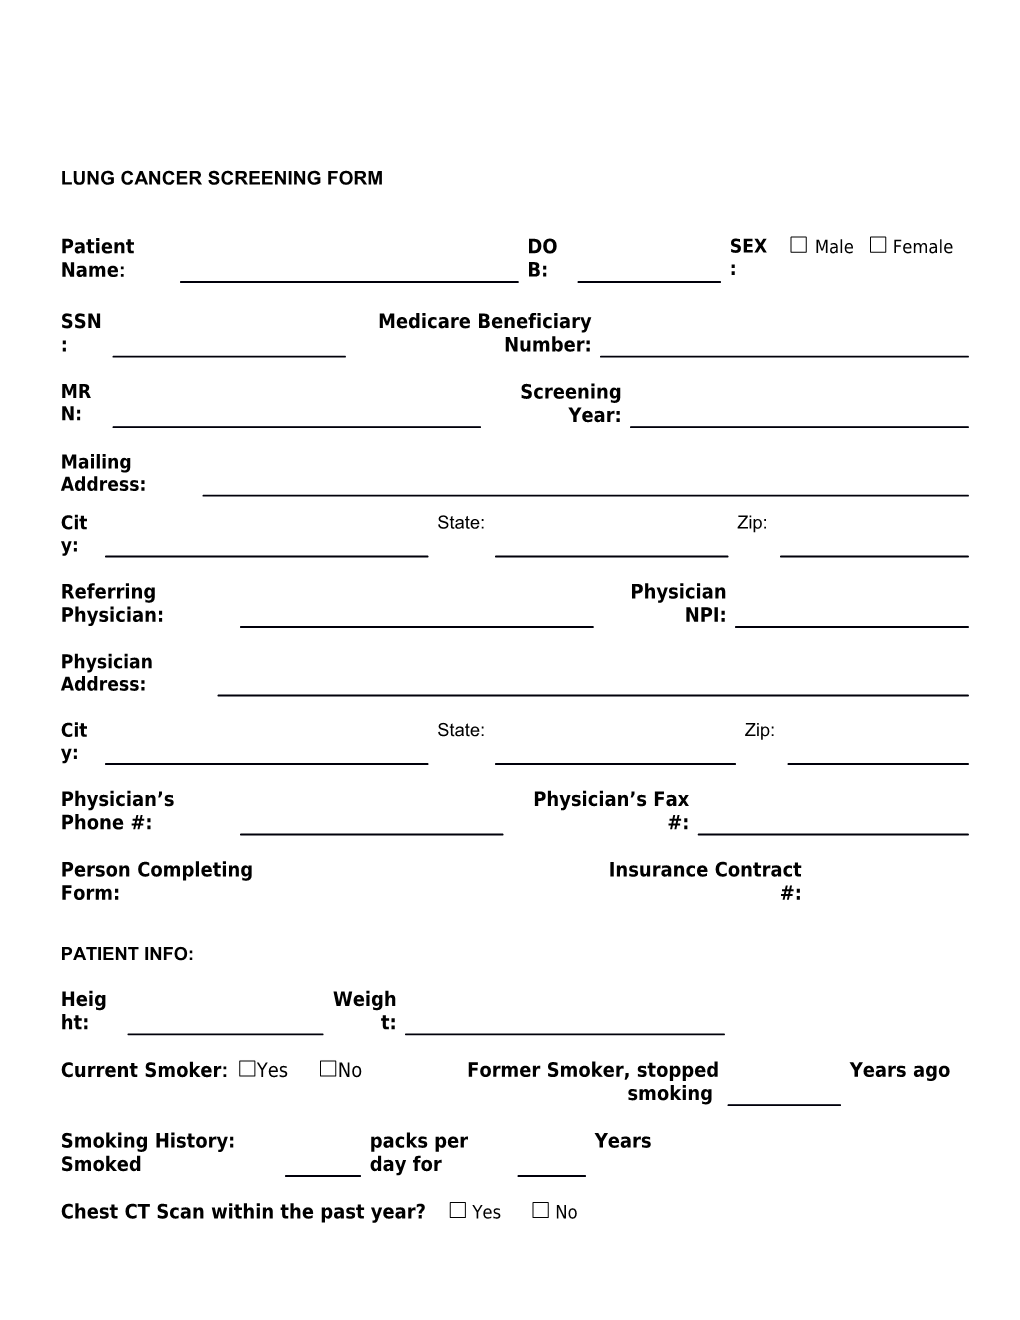 Lung Cancer Screening Form